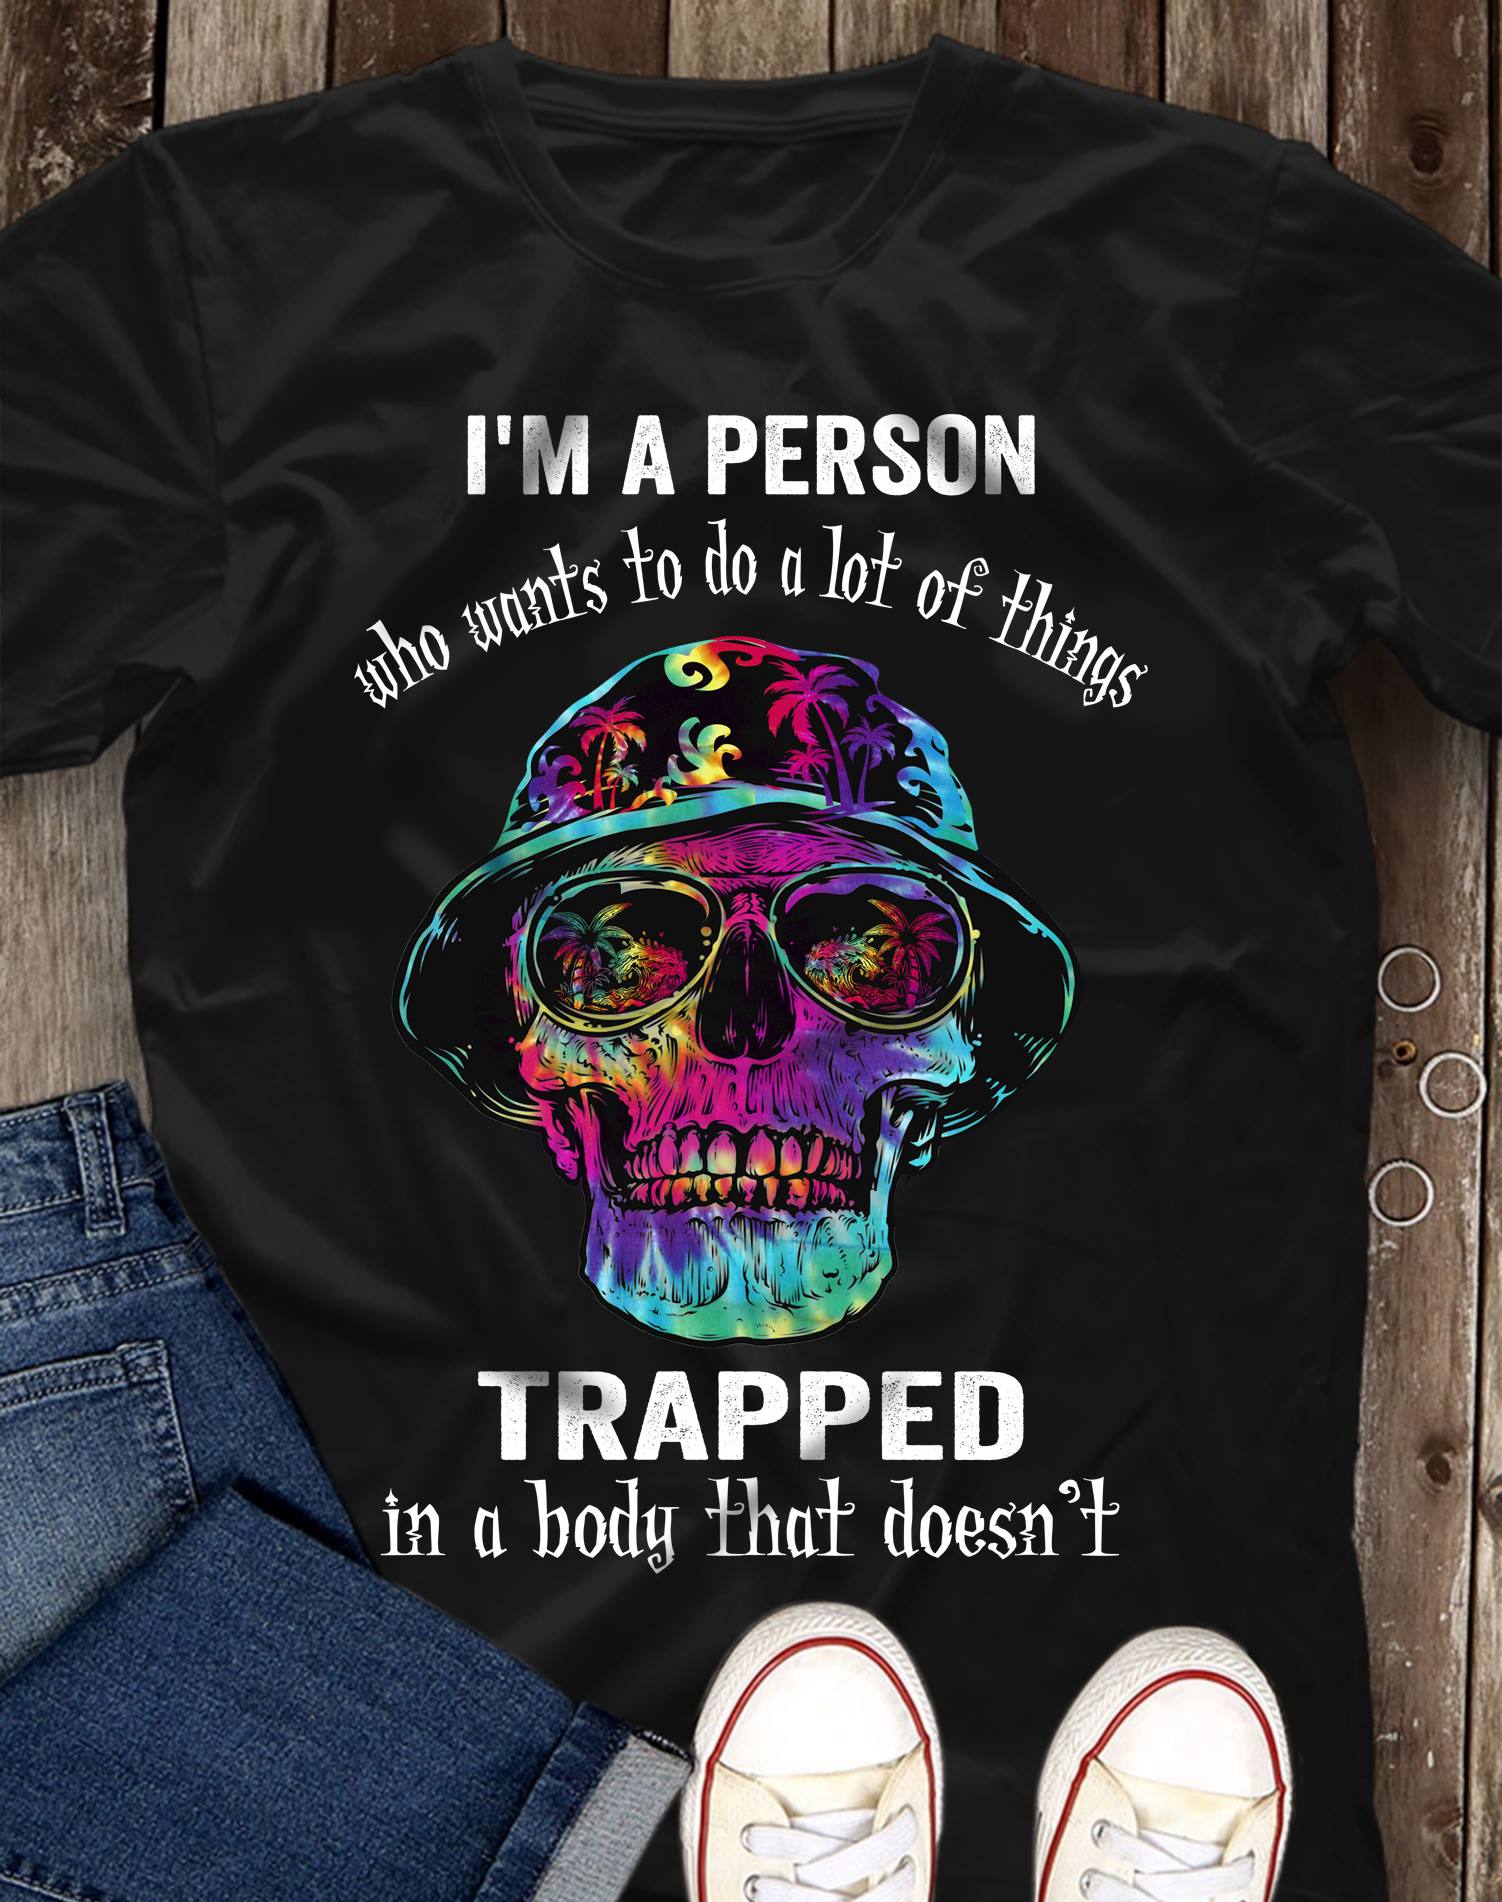 I'm a person who wants to do a lot of things trapped in a body that doesn't - Evil skullcap